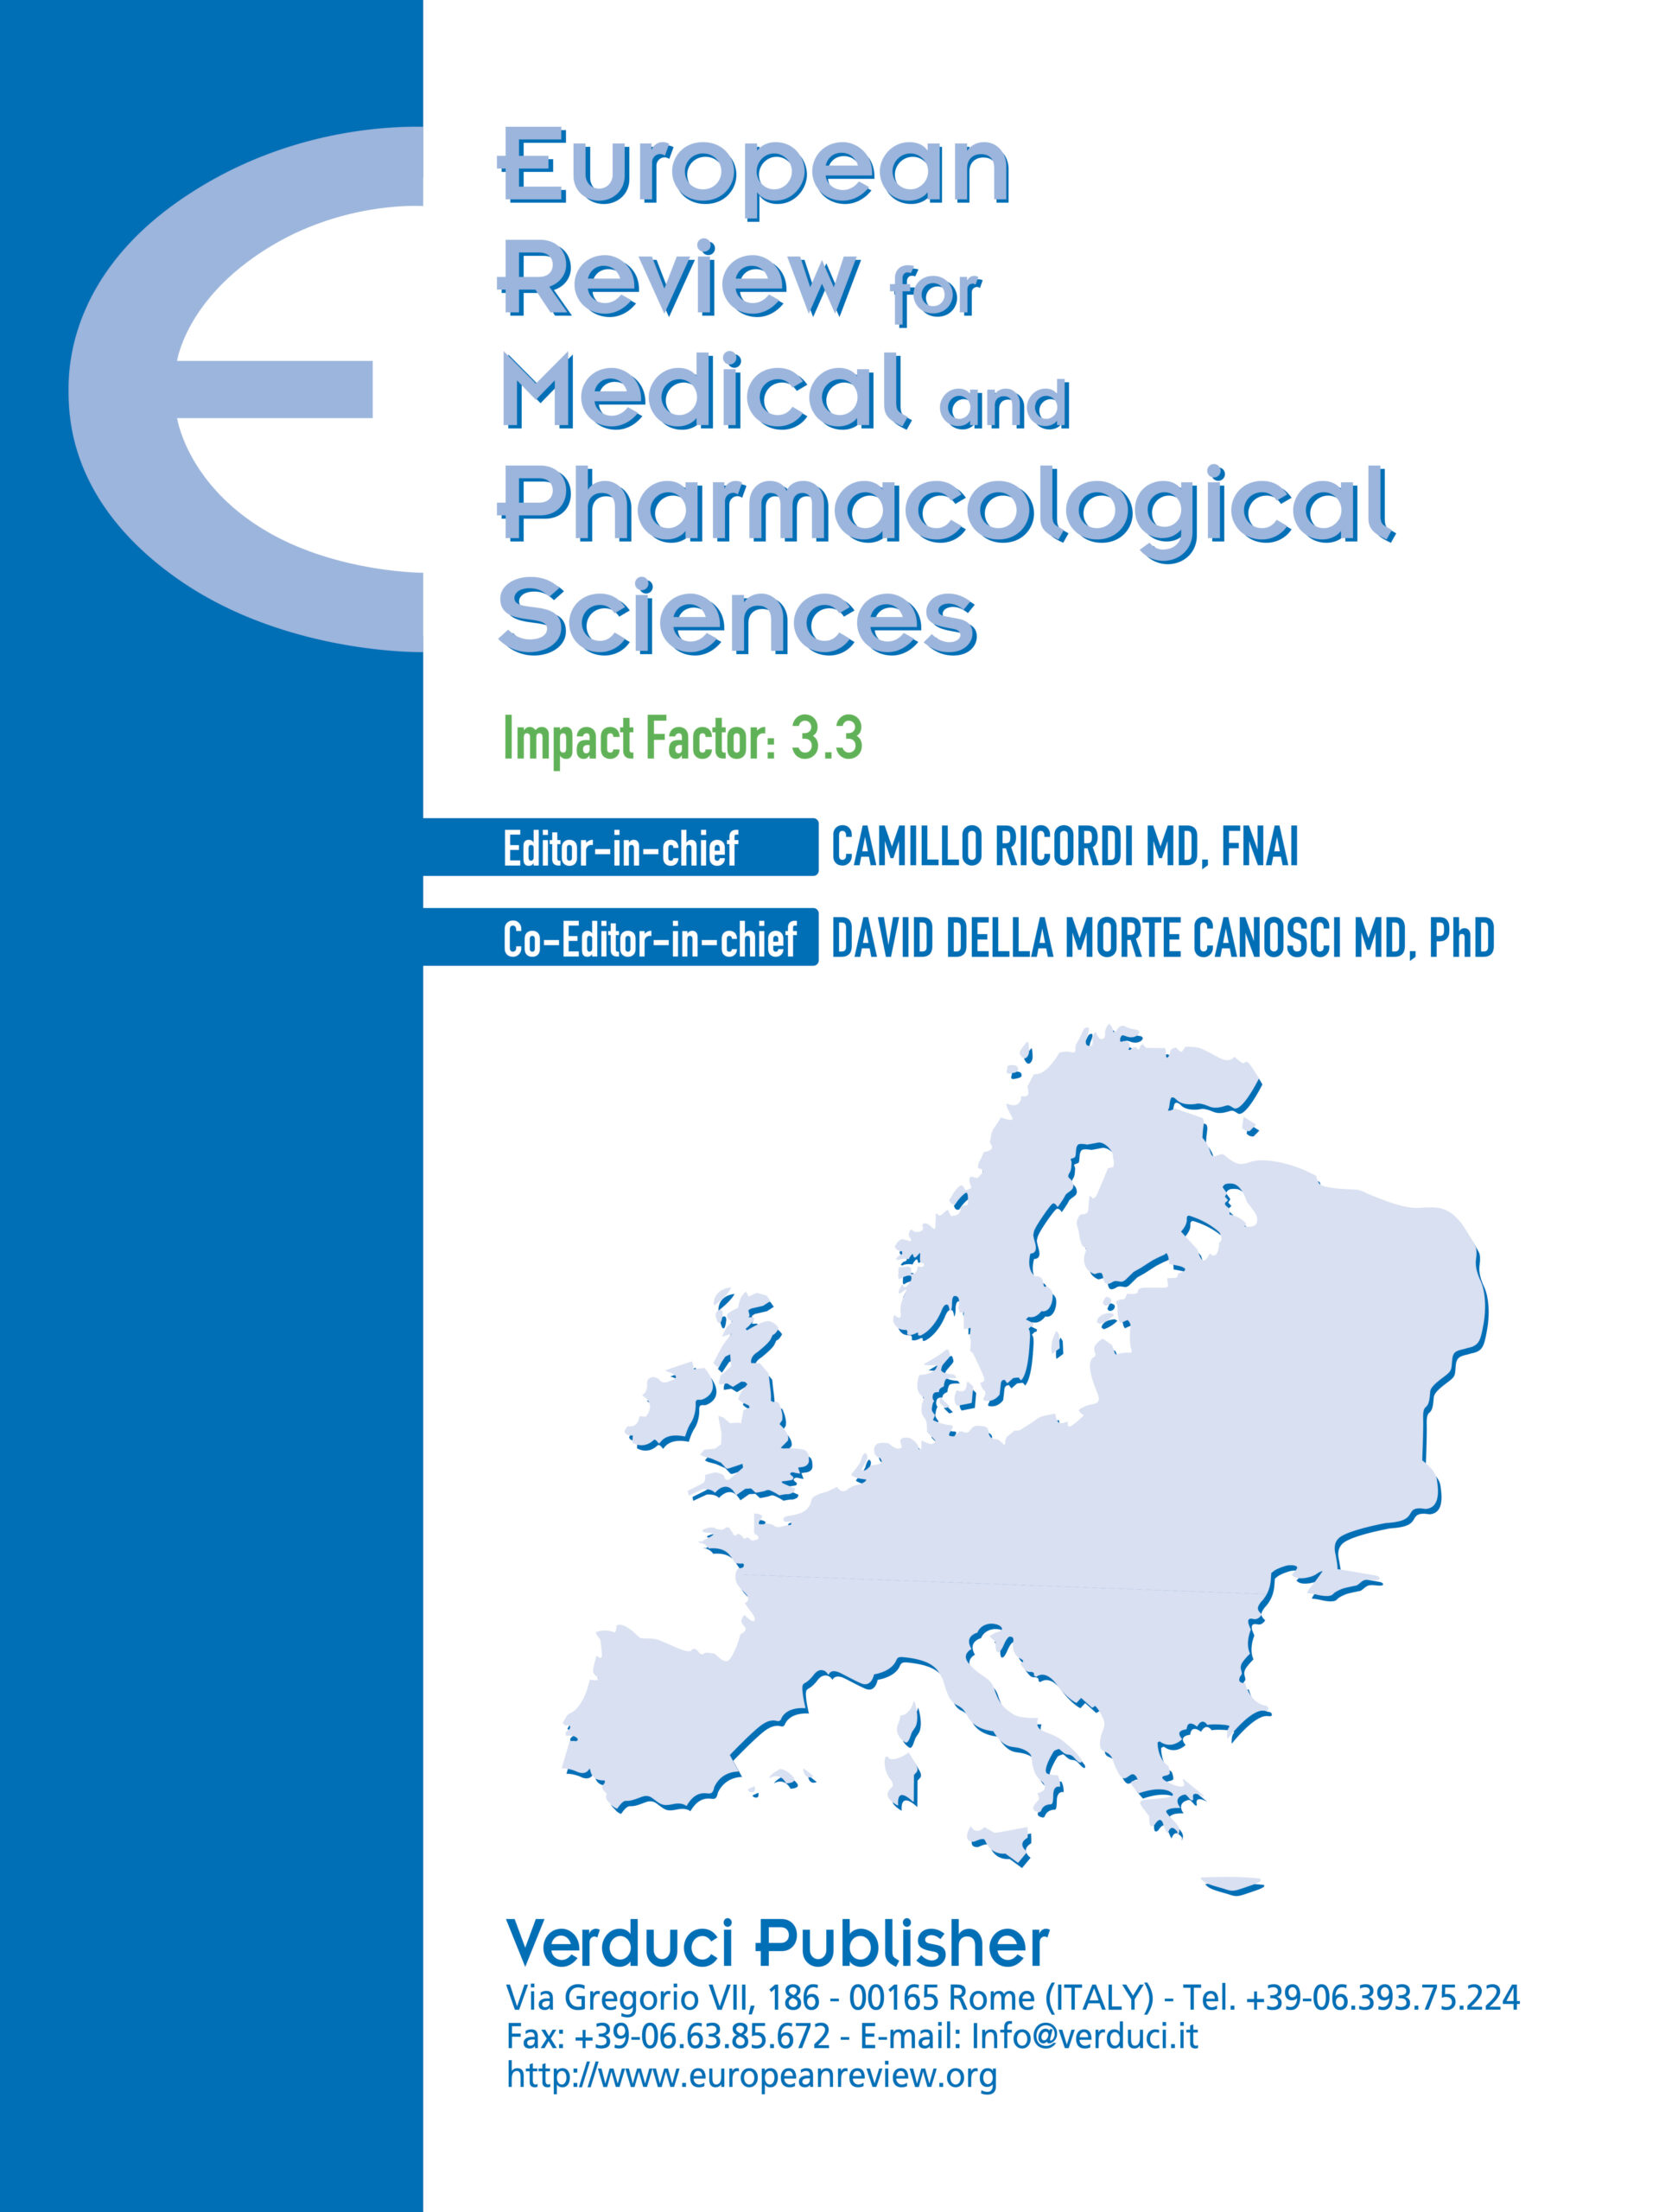 European Review for Medical and Pharmacological Sciences推荐投稿吗